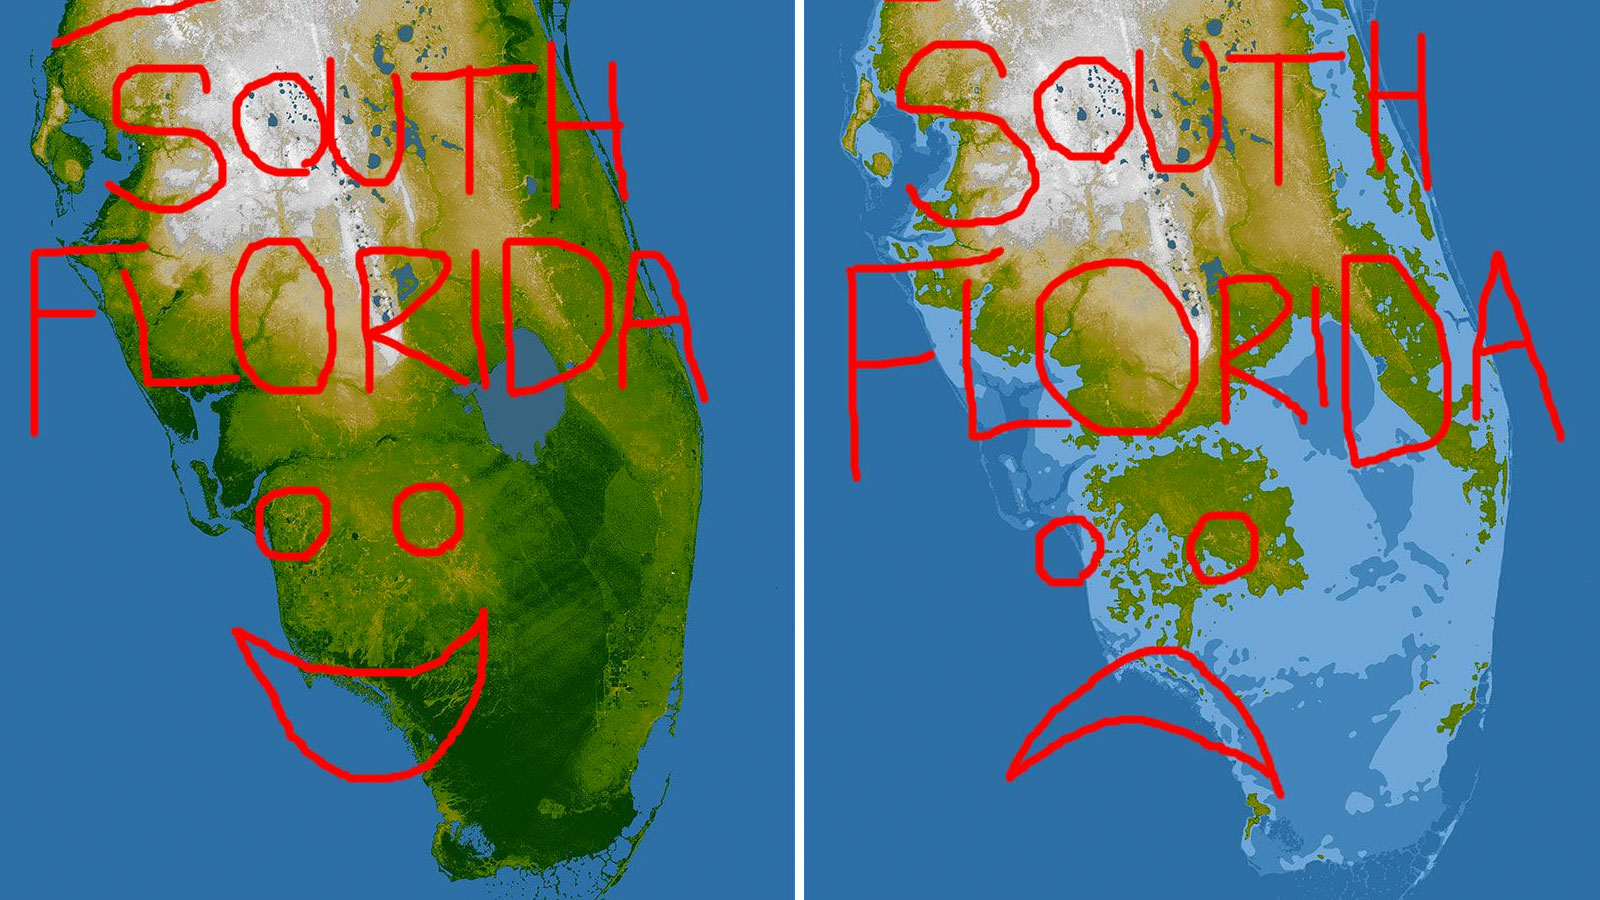 What rising sea levels will do to South Florida.